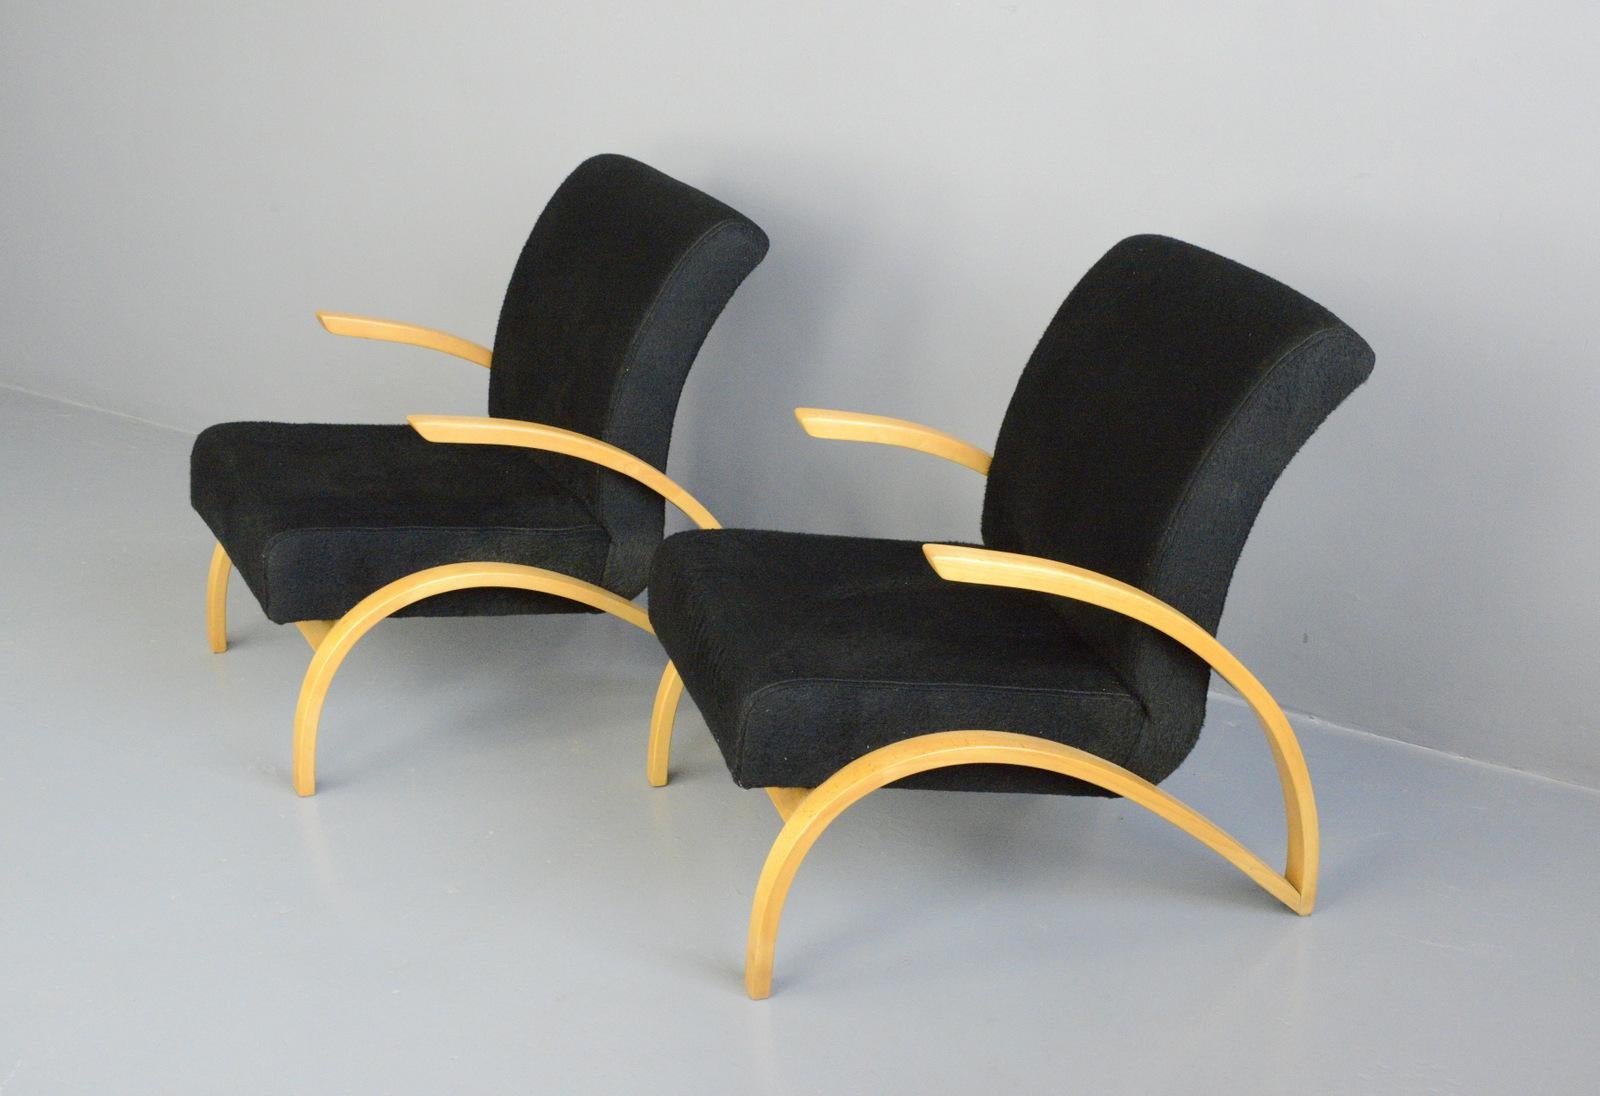 Bauhaus armchairs by Gelenka, circa 1930s

- Price is for the pair
- Curved beech frames
- Sprung seats
- Black plush upholstery
- Made by Gelenka
- German, 1930s
- Measures: 67cm wide x 90cm deep x 86cm tall
- 45cm seat height

Condition